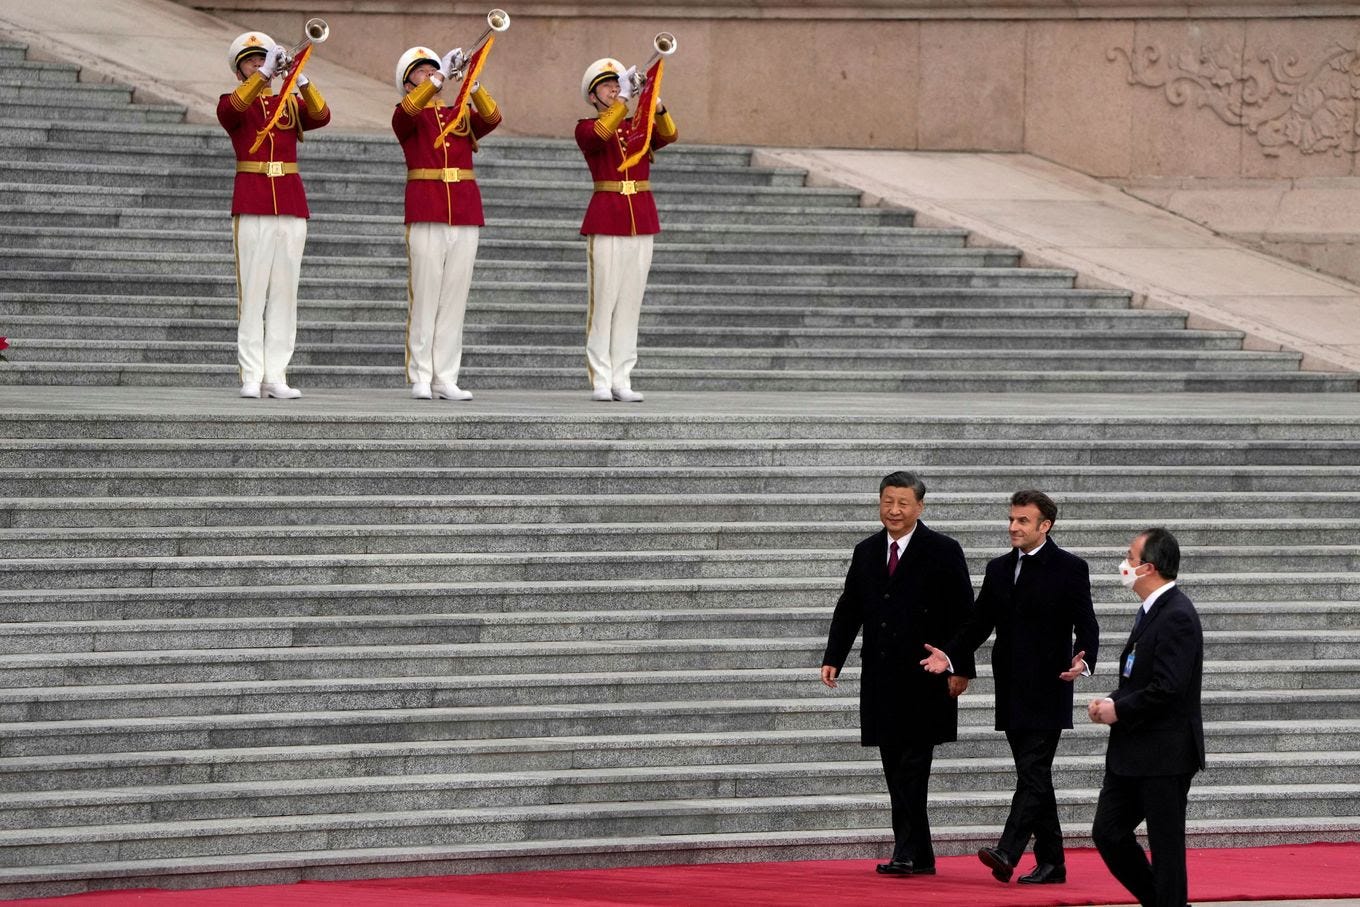 French President Emmanuel Macron walks with Chinese President Xi Jinping during a welcome ceremony outside the Great Hall of the People in Beijing on April 6. (Ng Han Guan/Pool/Reuters/via REUTERS)